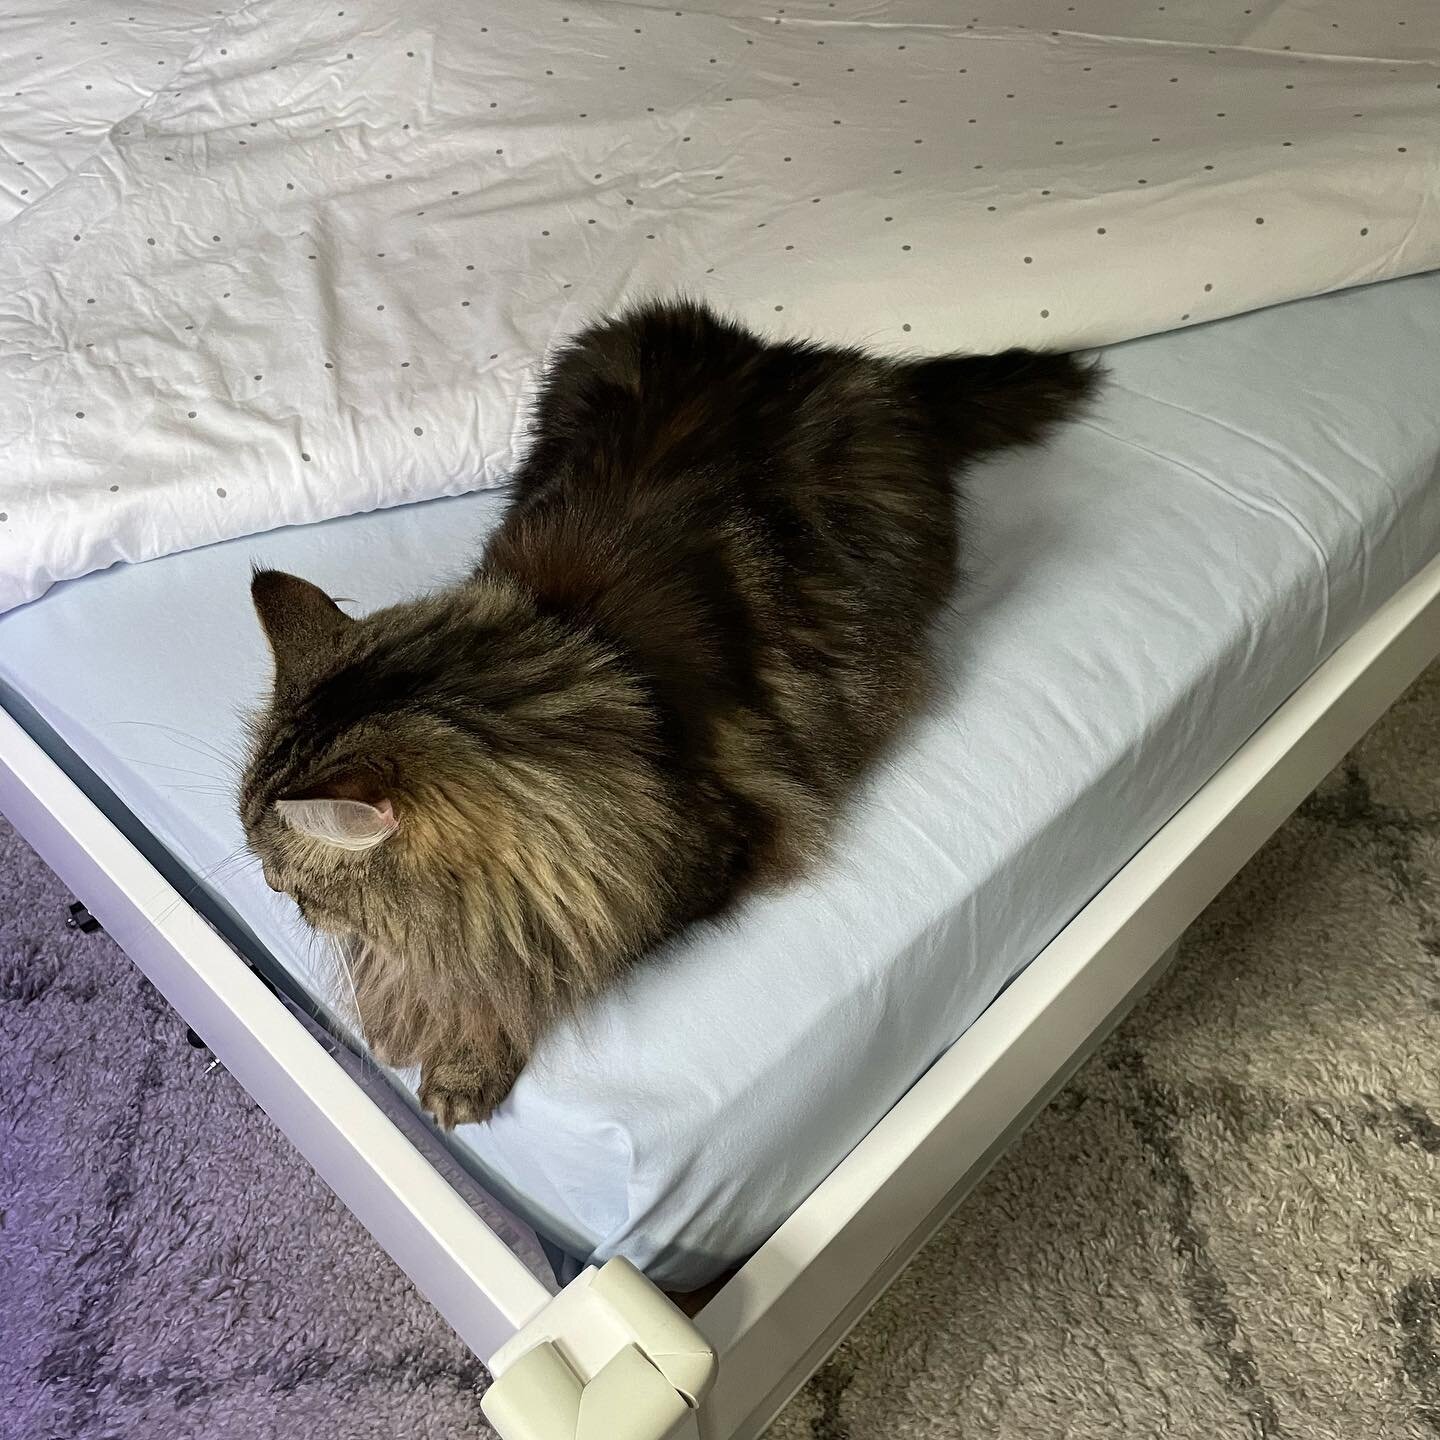 Anyone else have to make their bed like this because their cat has decided to park their floofy butt here? 😹😹😹